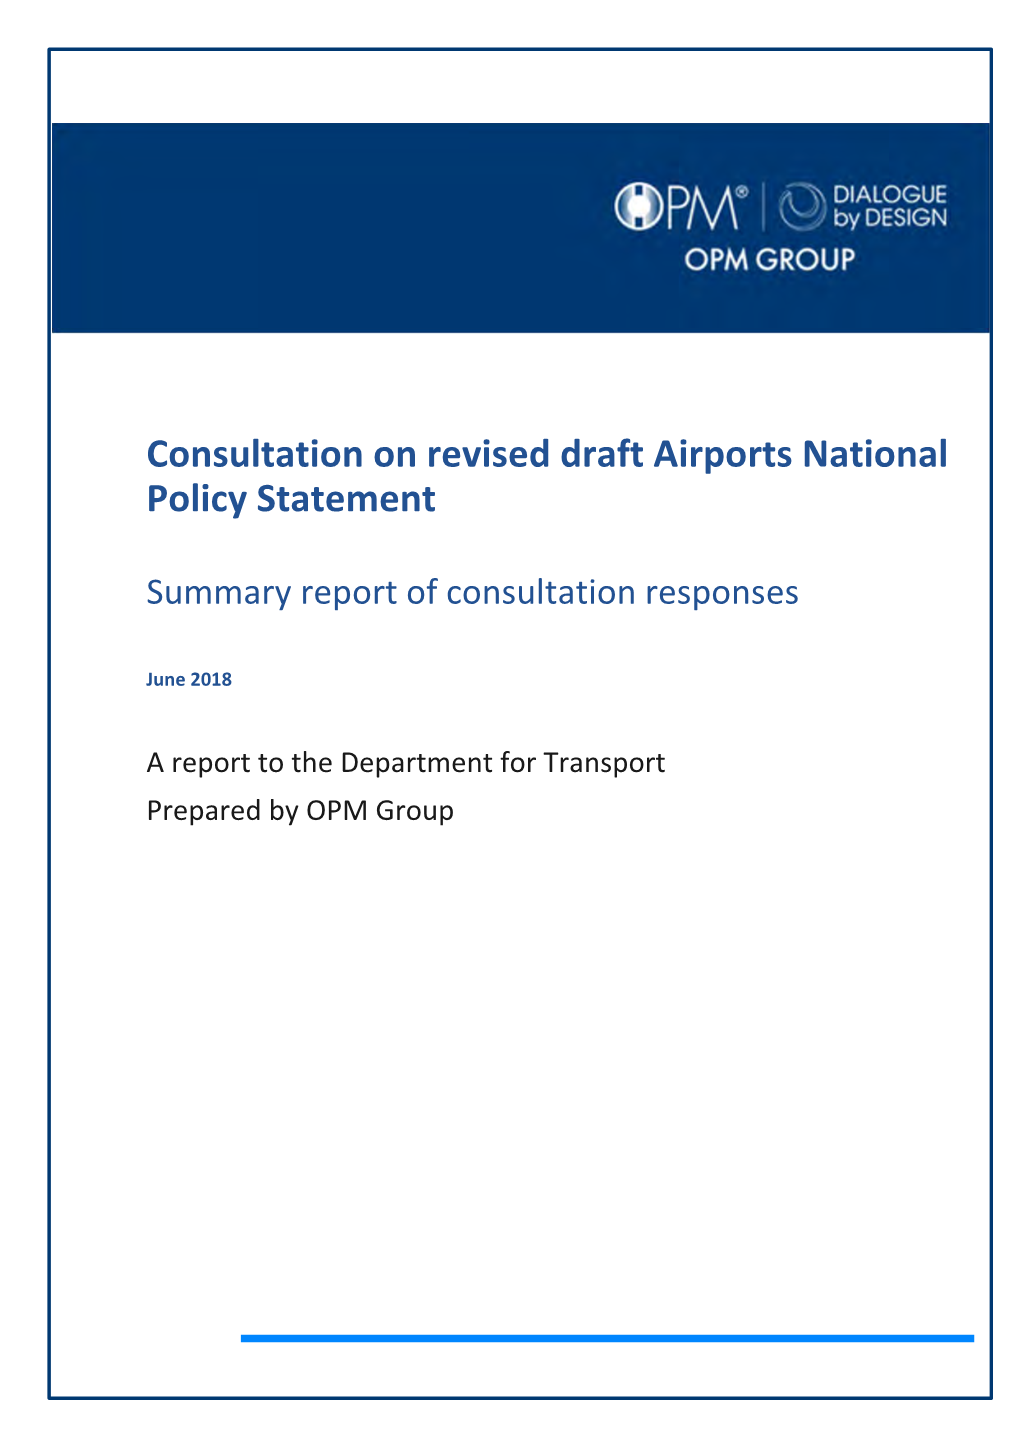 Consultation on Revised Draft Airports National Policy Statement